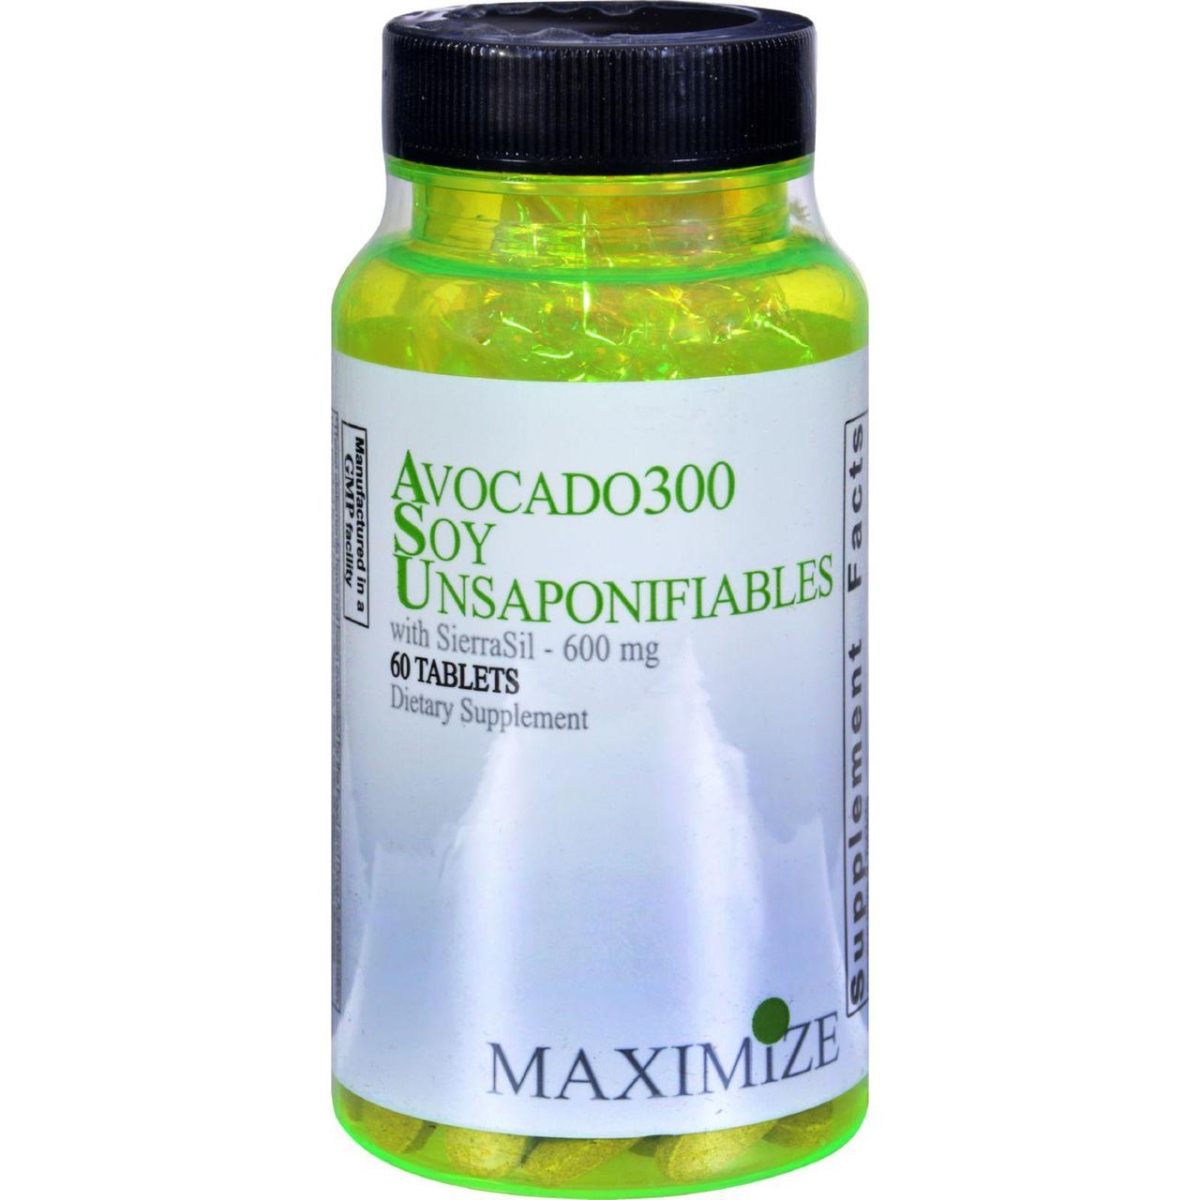 Hg0754218 600 Mg Avocado 300 Soy Unsaponifiables With Sierrasil, 60 Tablets